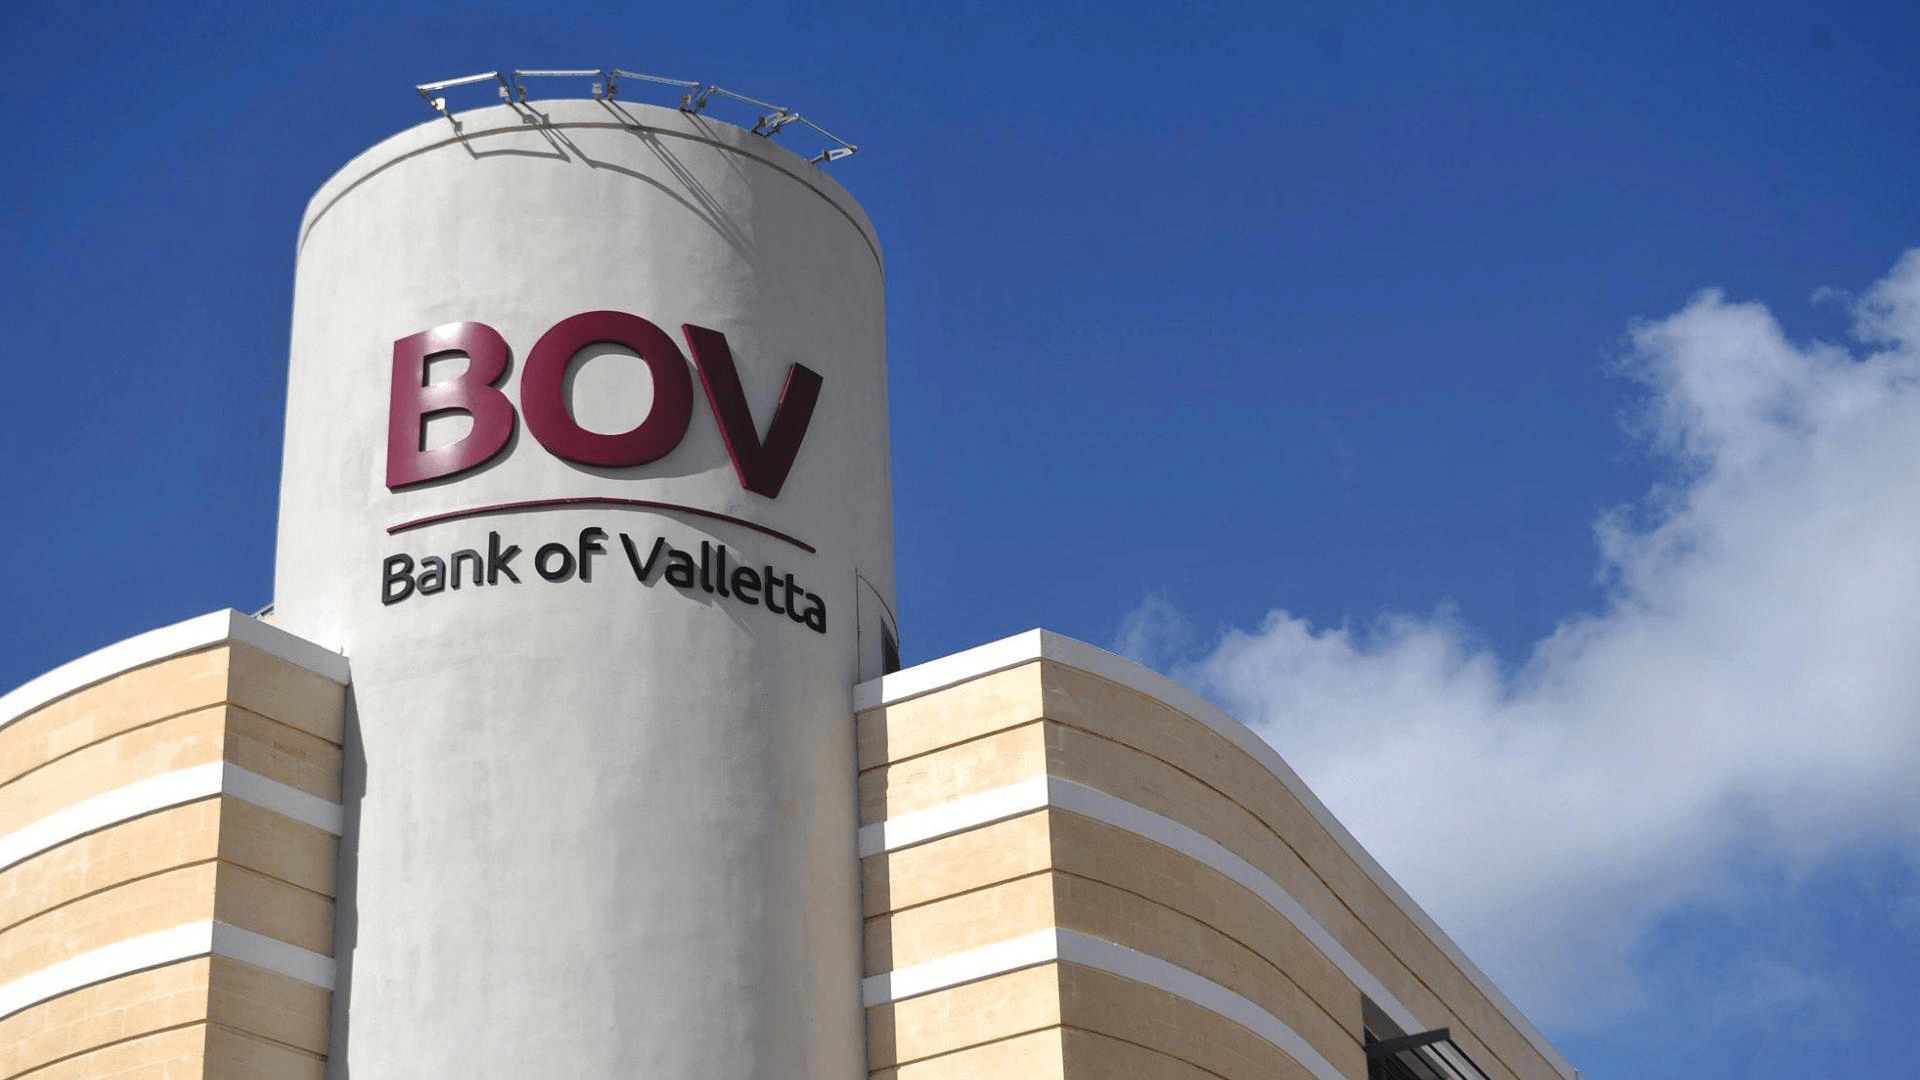 Guide to Banking with Bank of Valletta in Malta